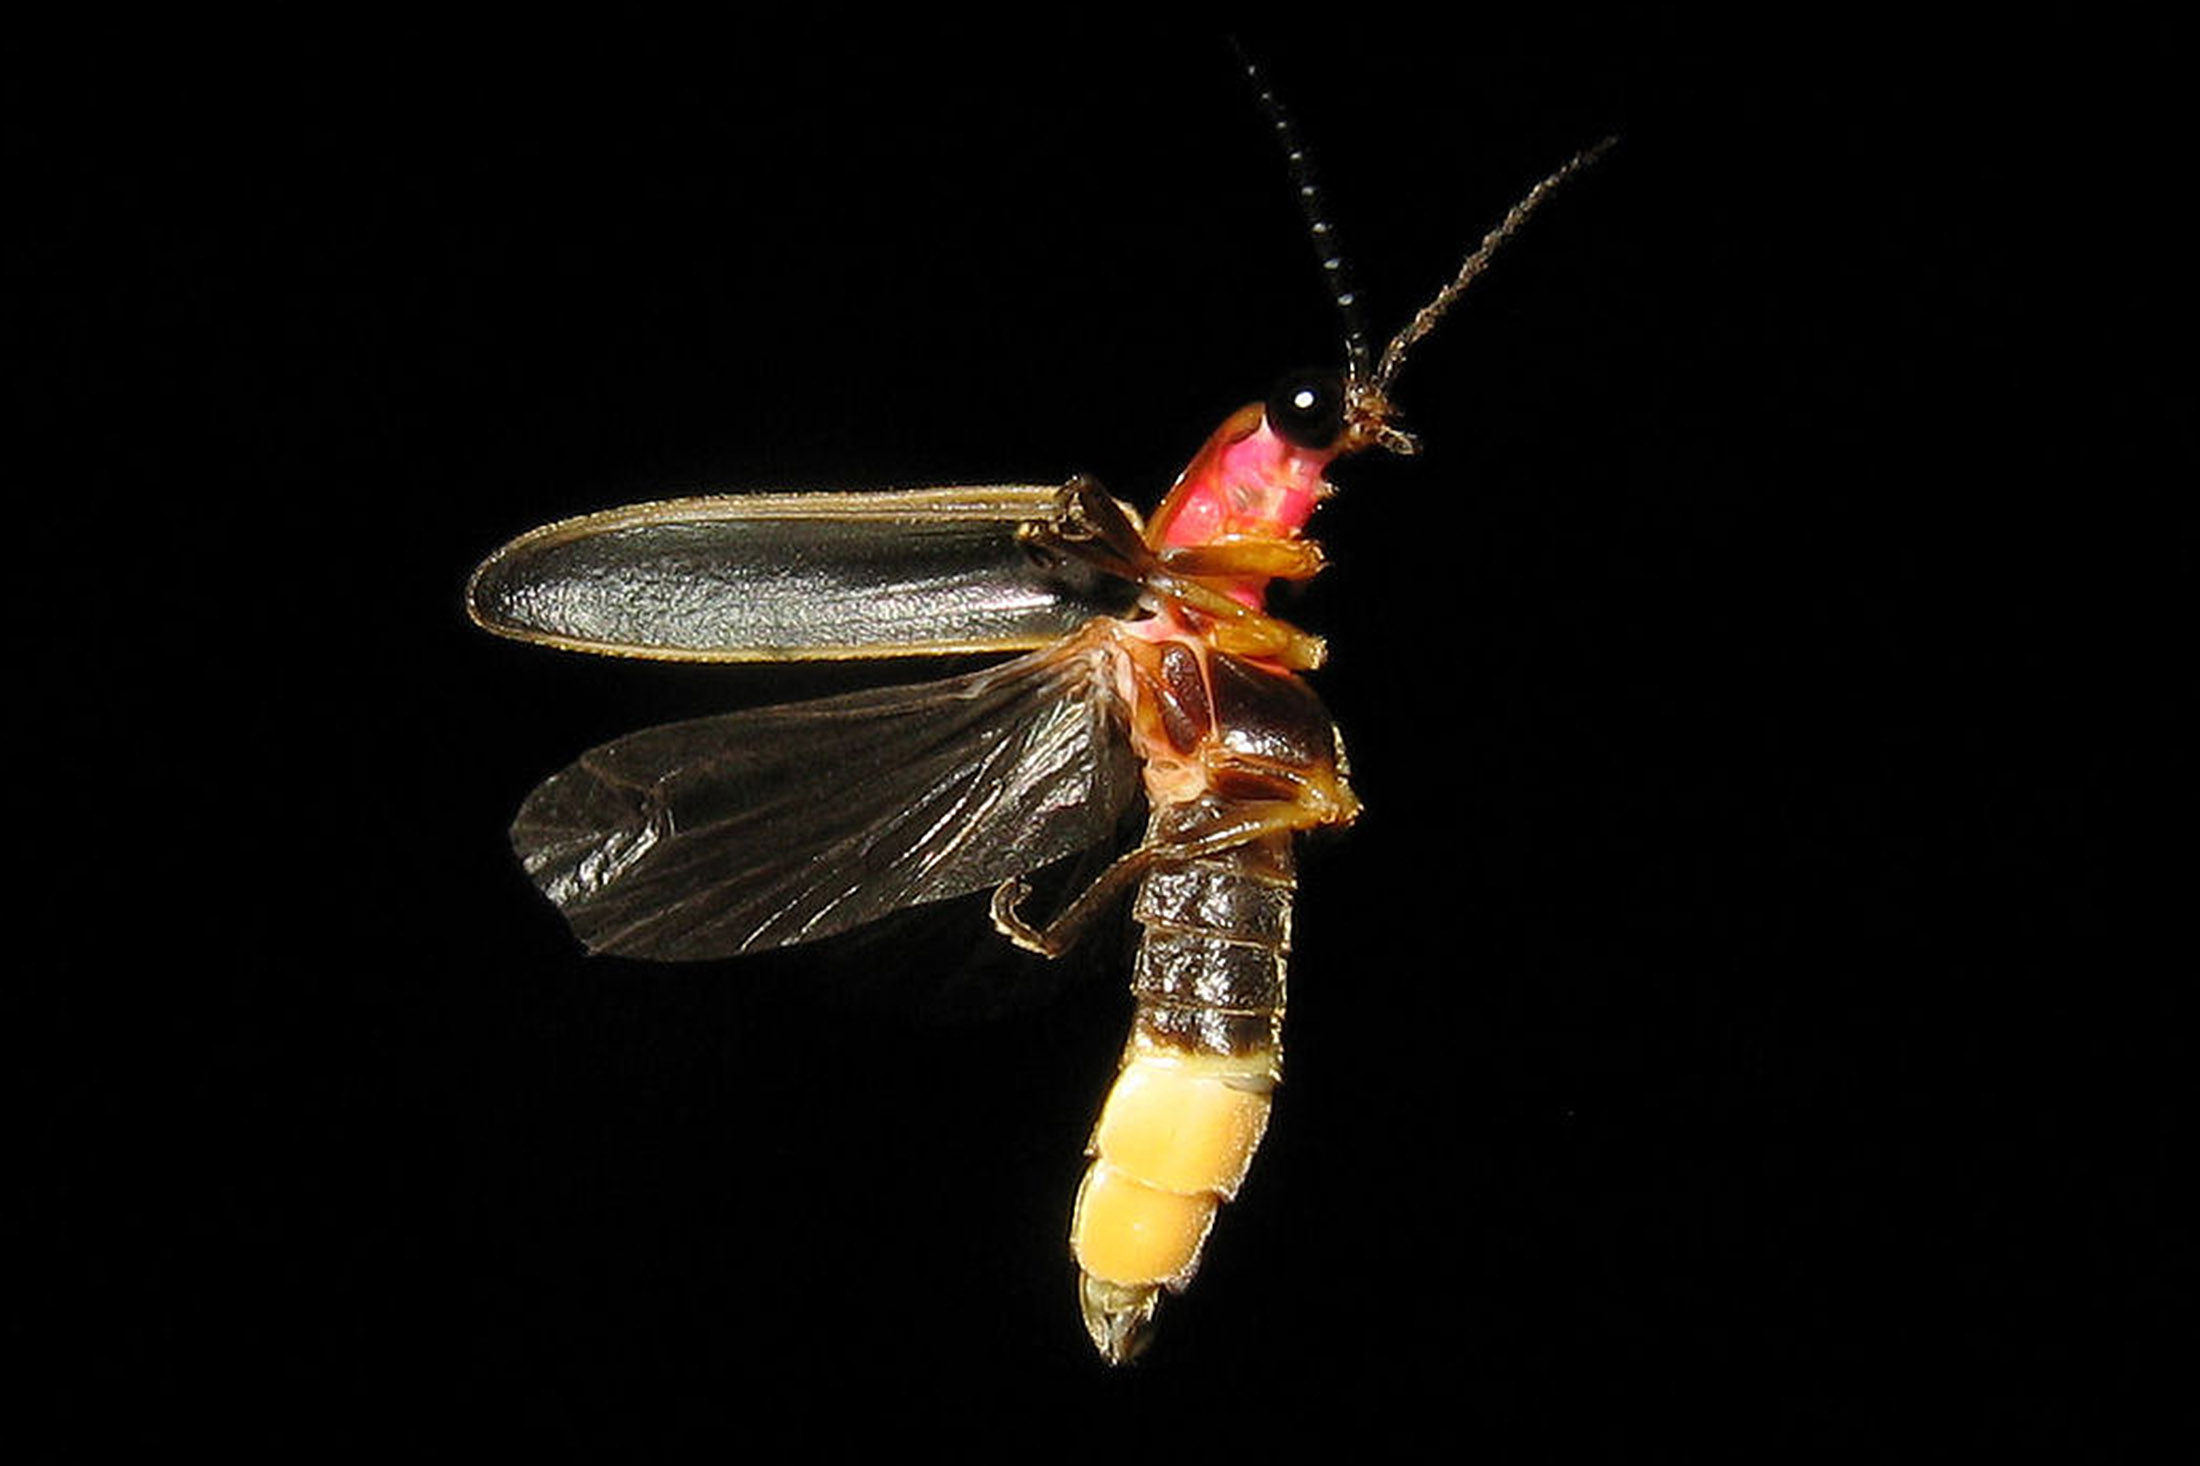 The common eastern firefly